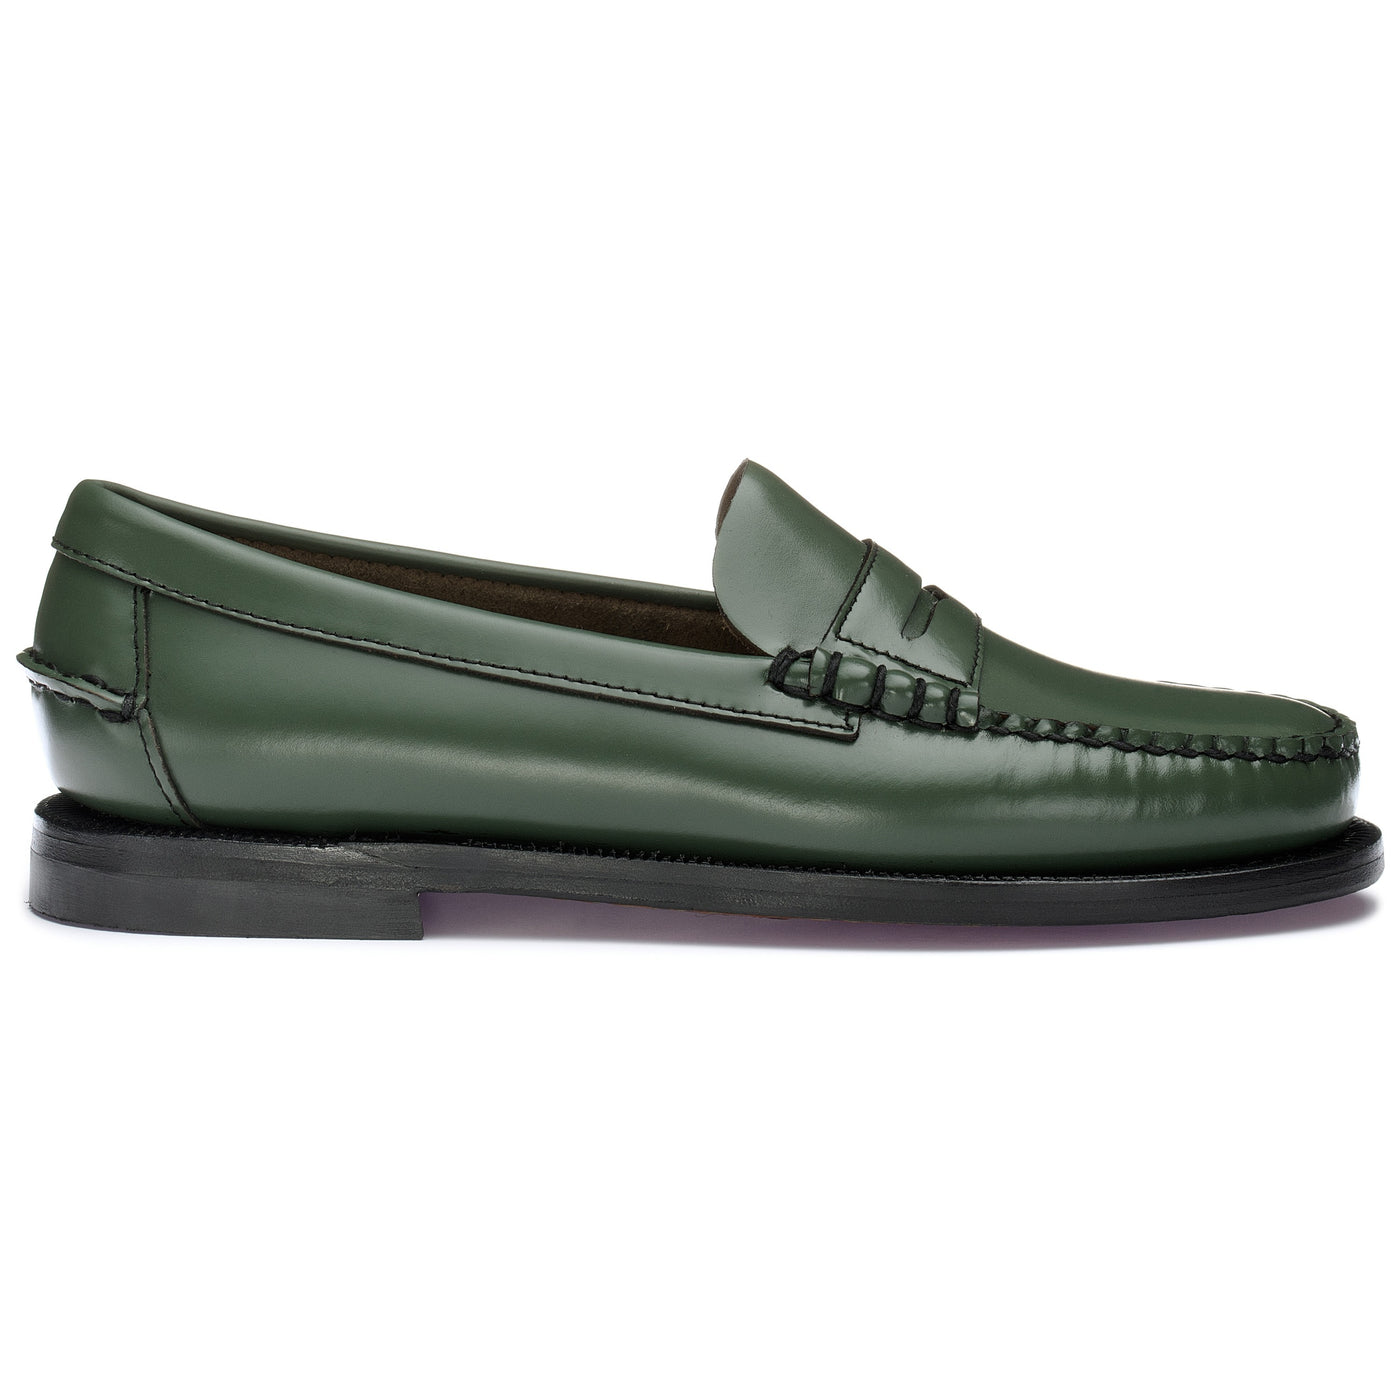 Shop Women's Loafers & Save